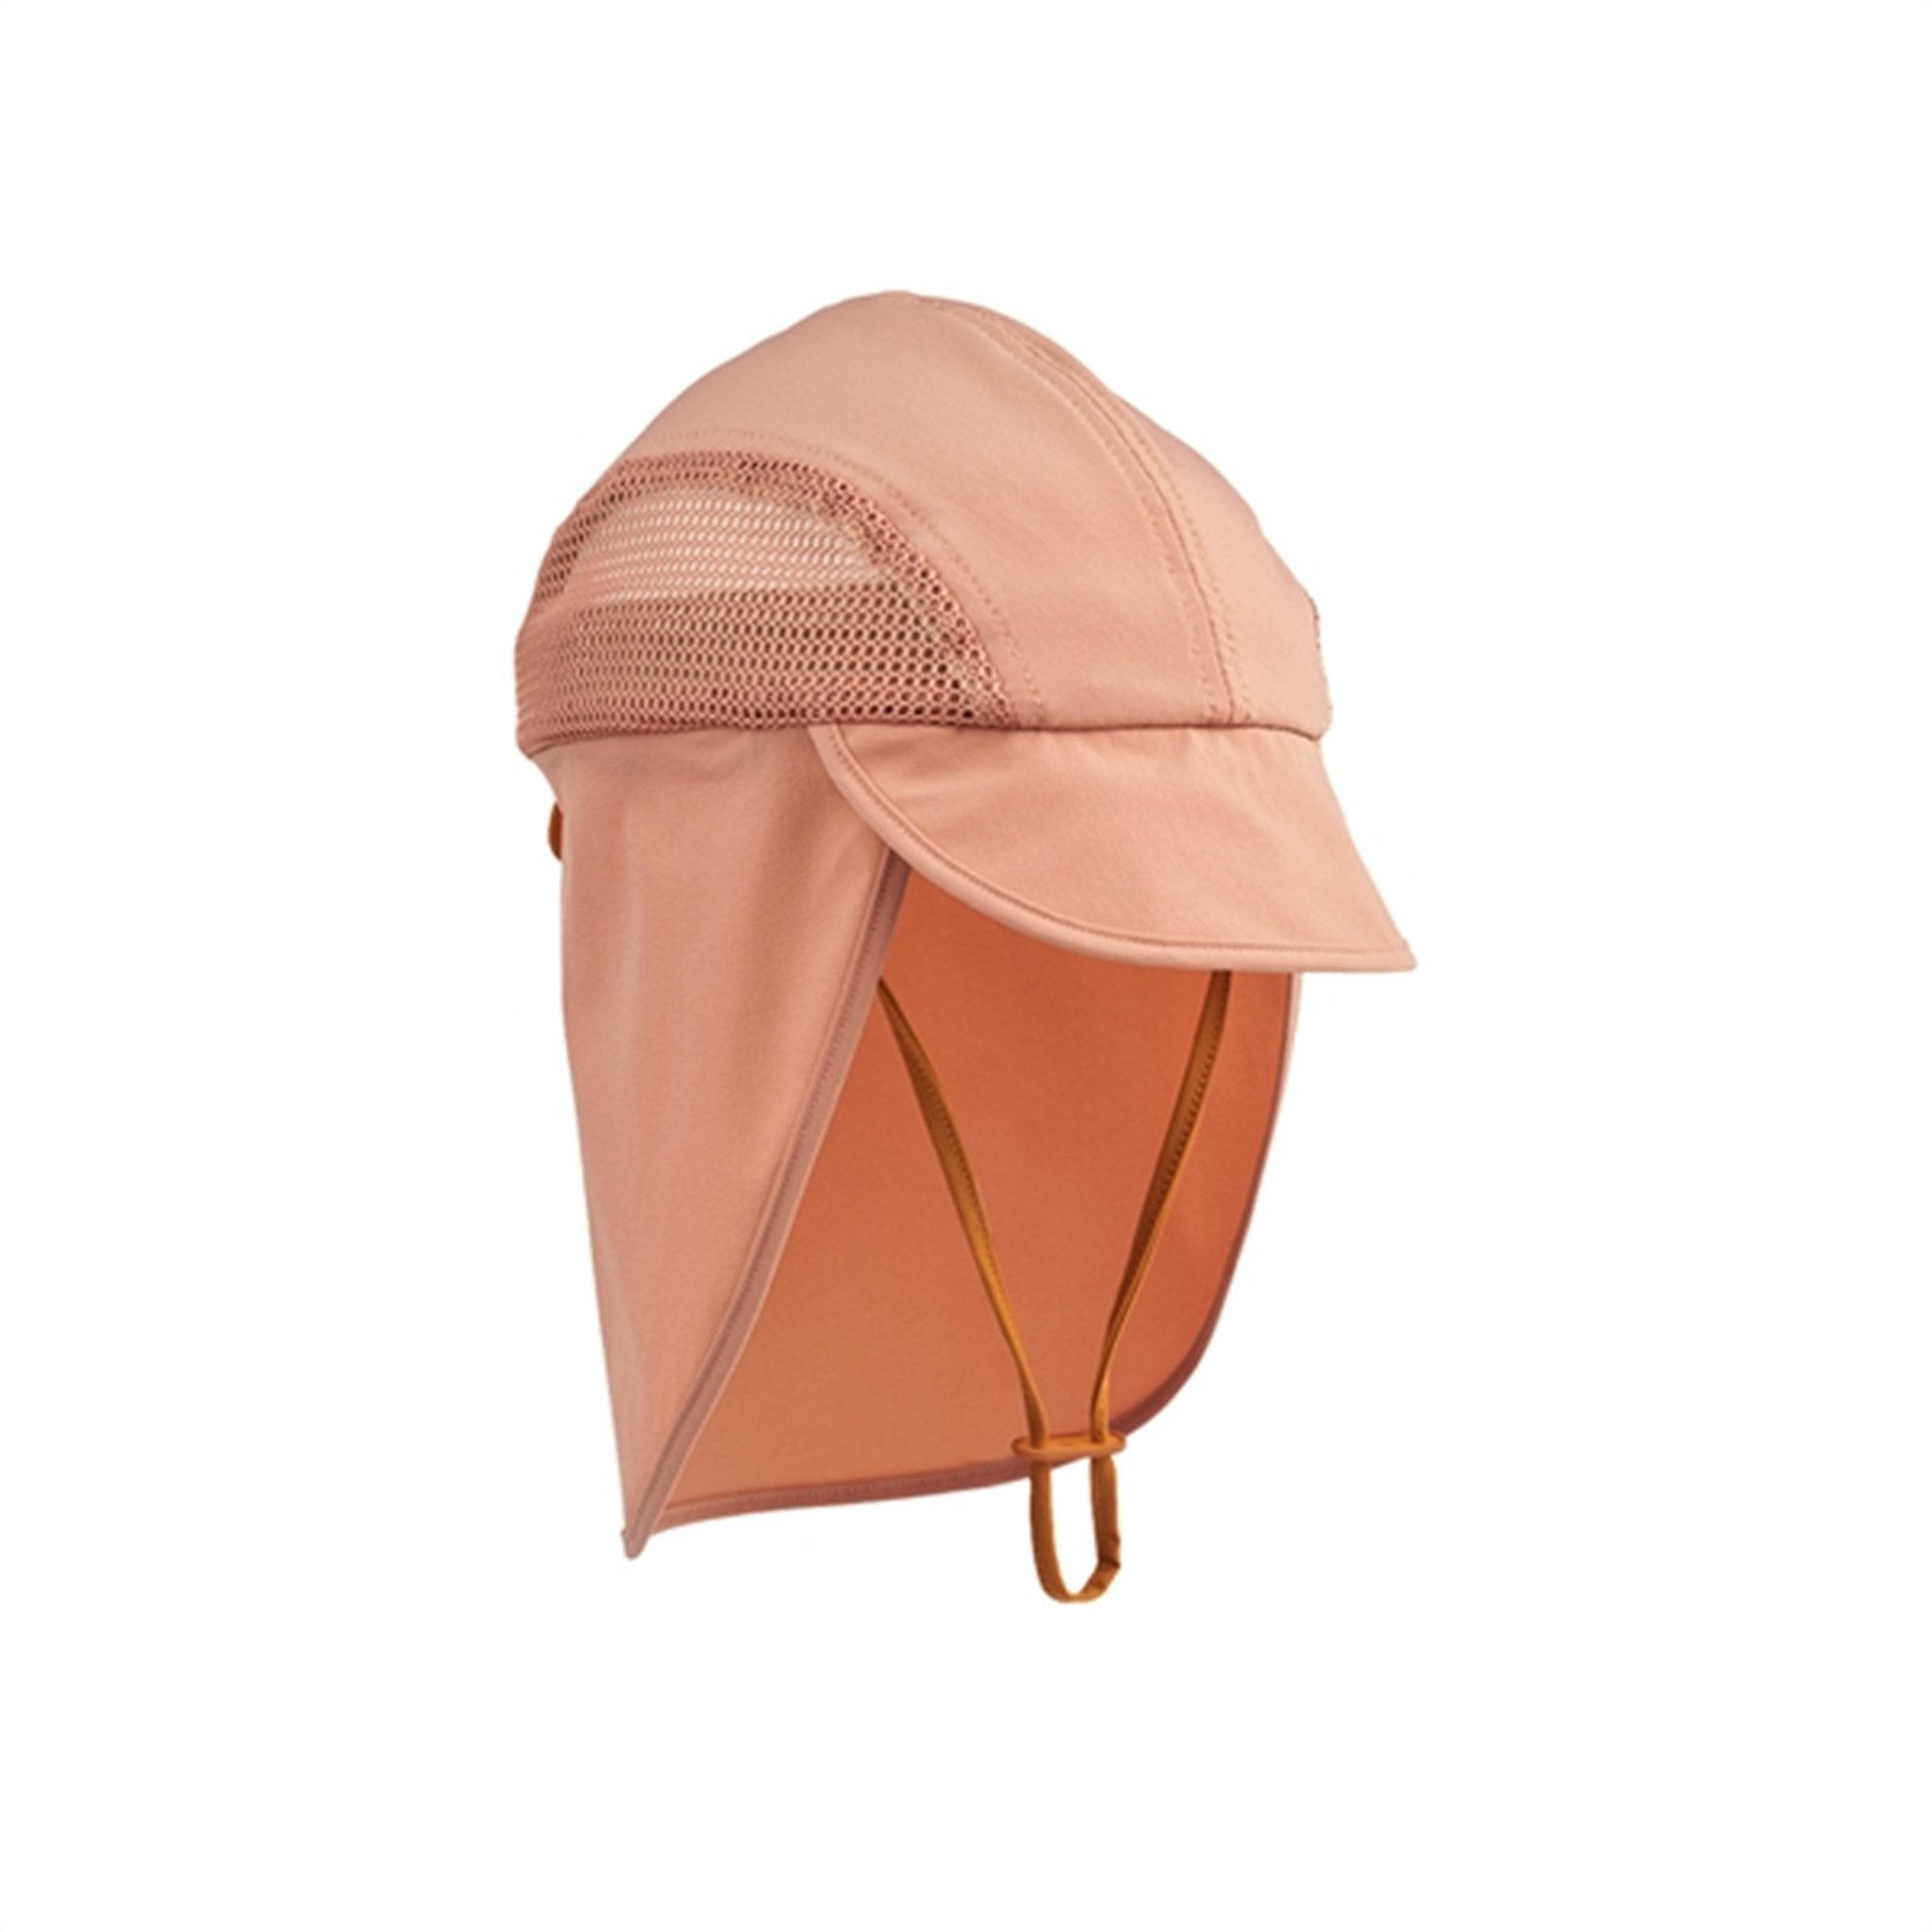 Liewood Lusia Sun Hat Tuscany Rose - Size 1-2 Y